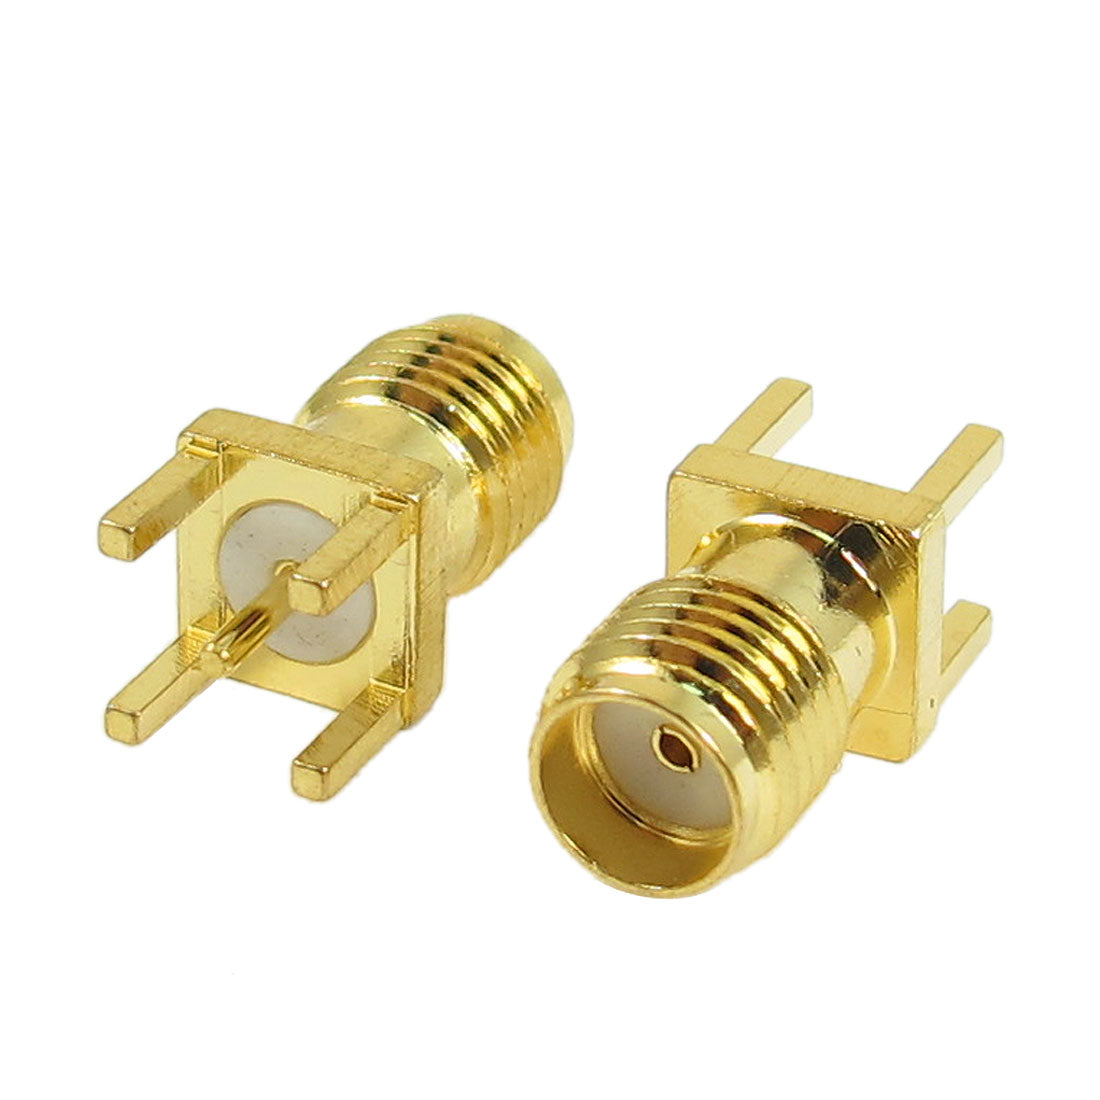 uxcell Uxcell 2 Pcs Gold tone PCB Mount SMA Female Jack RF Coax Coaxial Connector Adapter